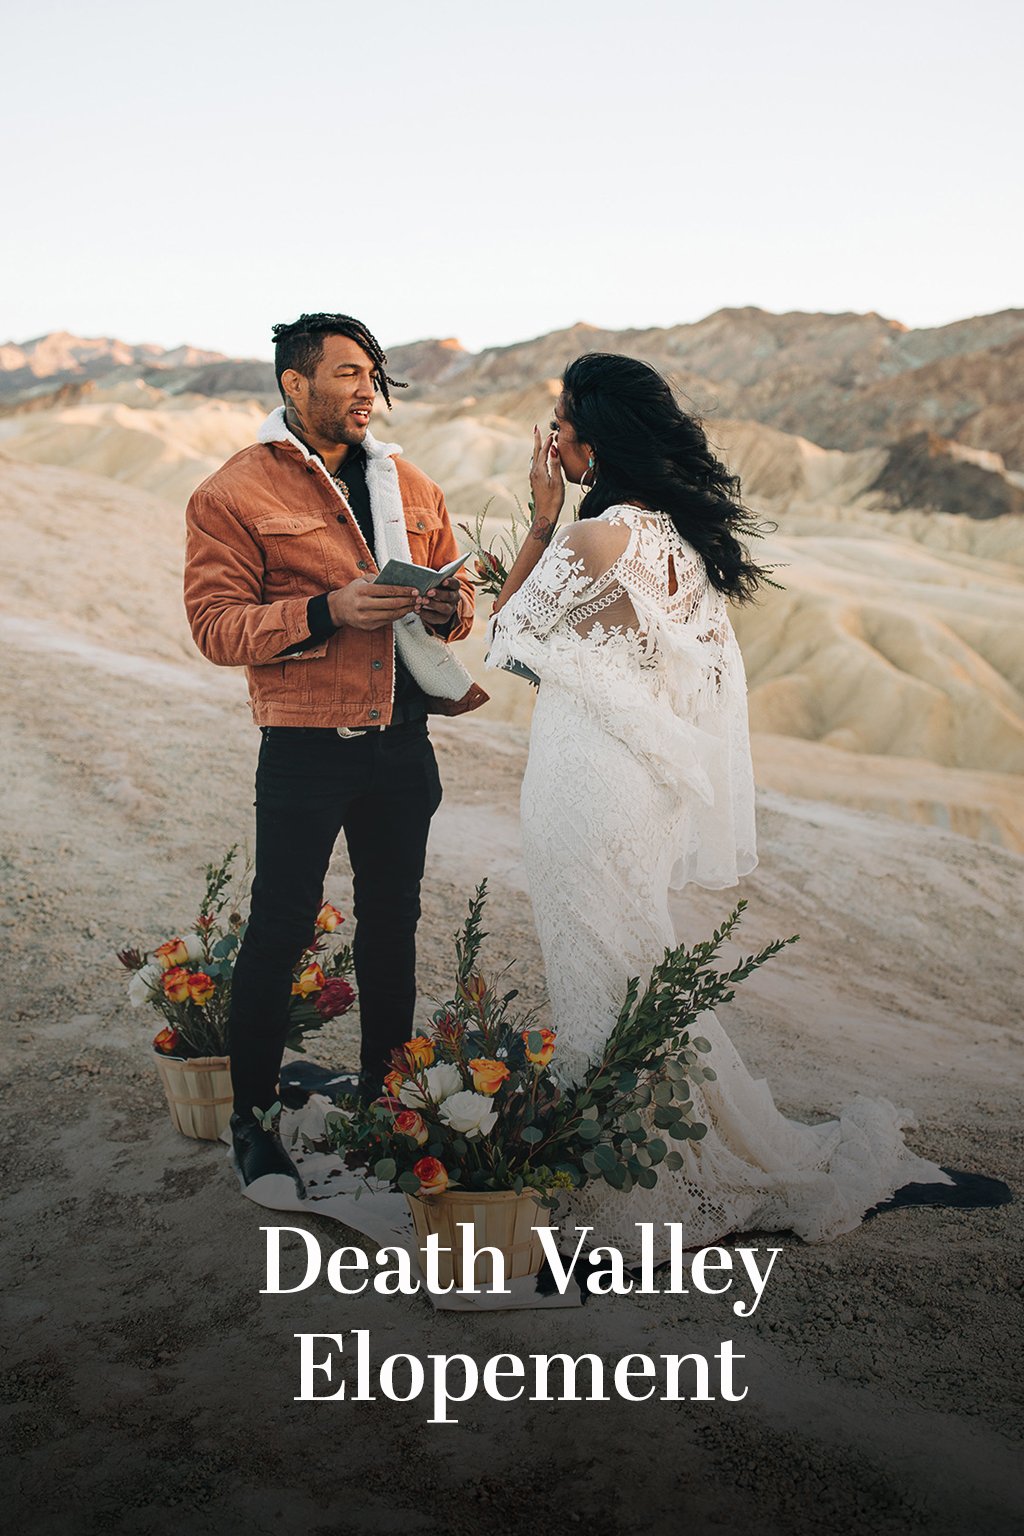 An image of a couple reading vows with the text "Death Valley Elopement"